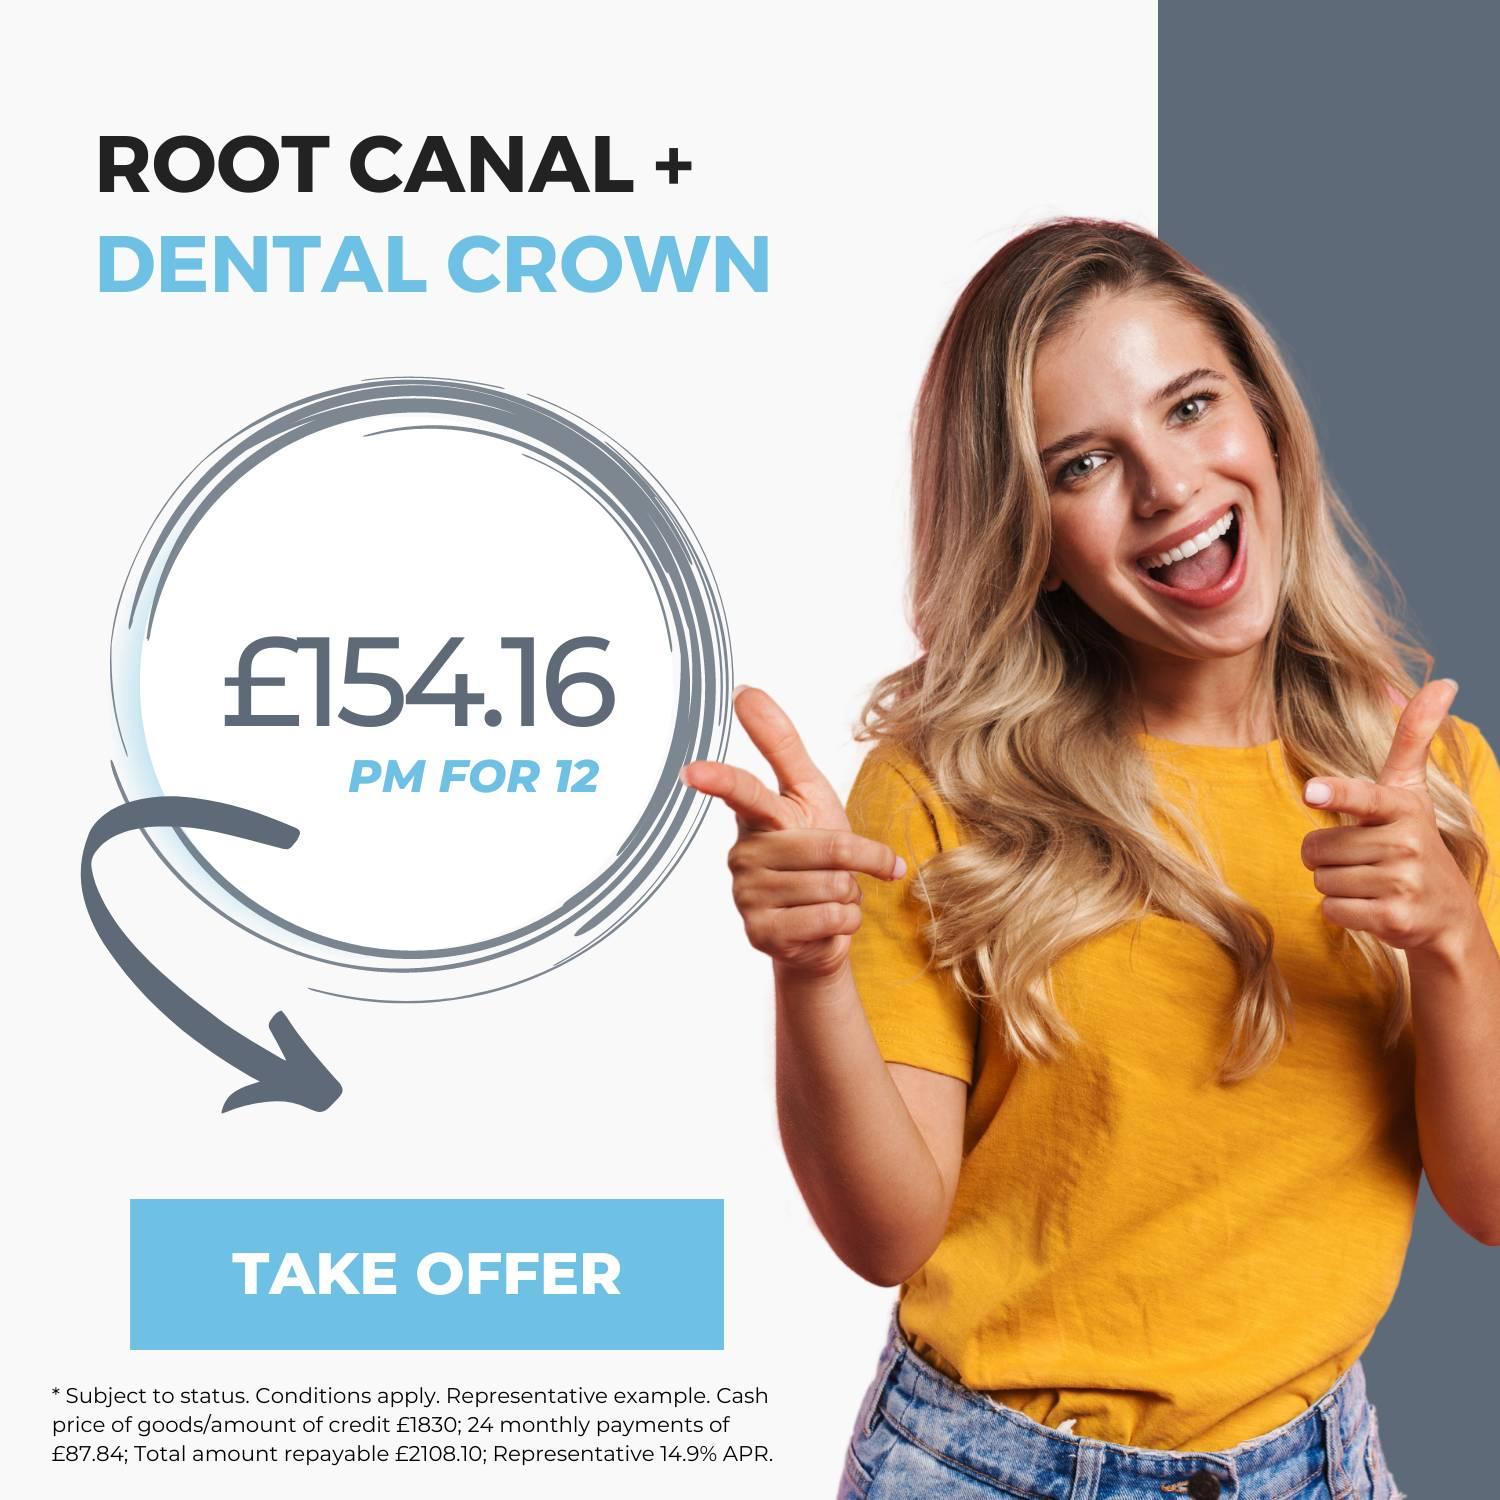 root canal + dental crown offer image